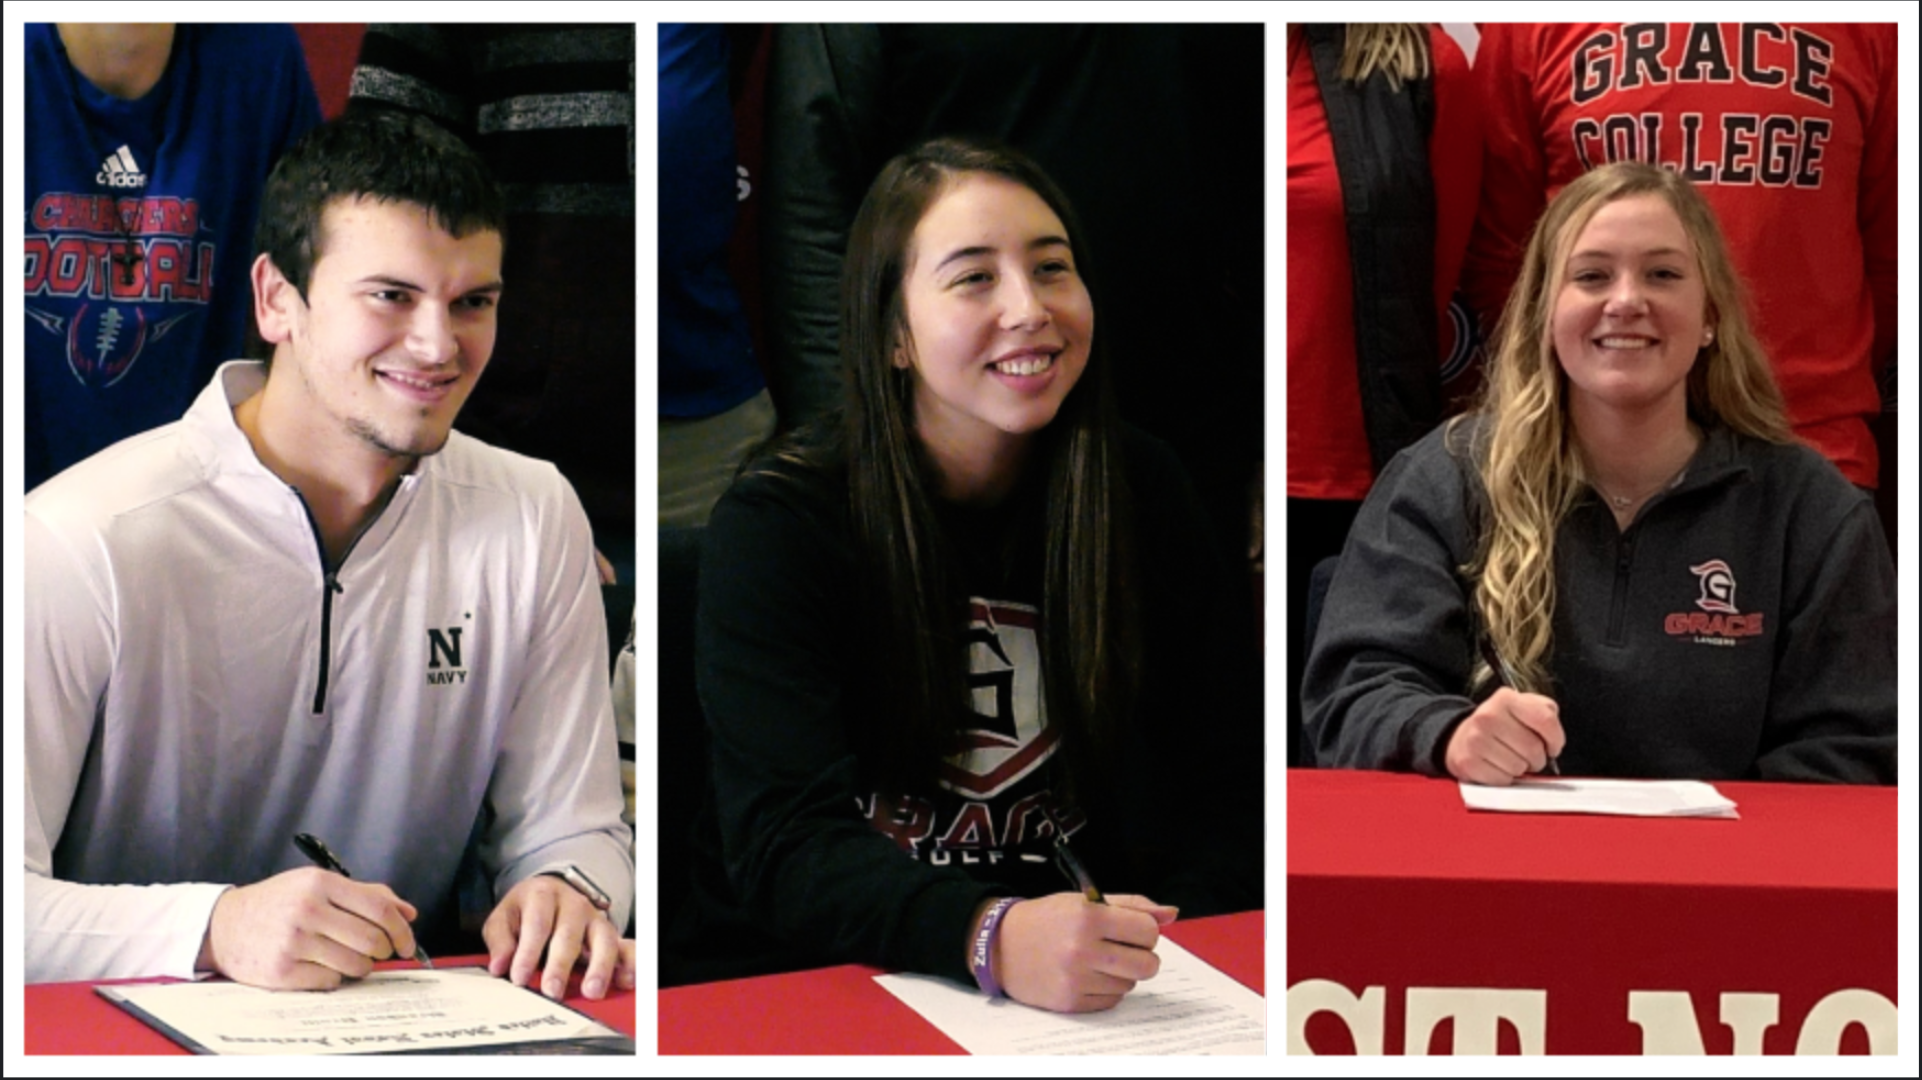 West Noble athletes make college plans official